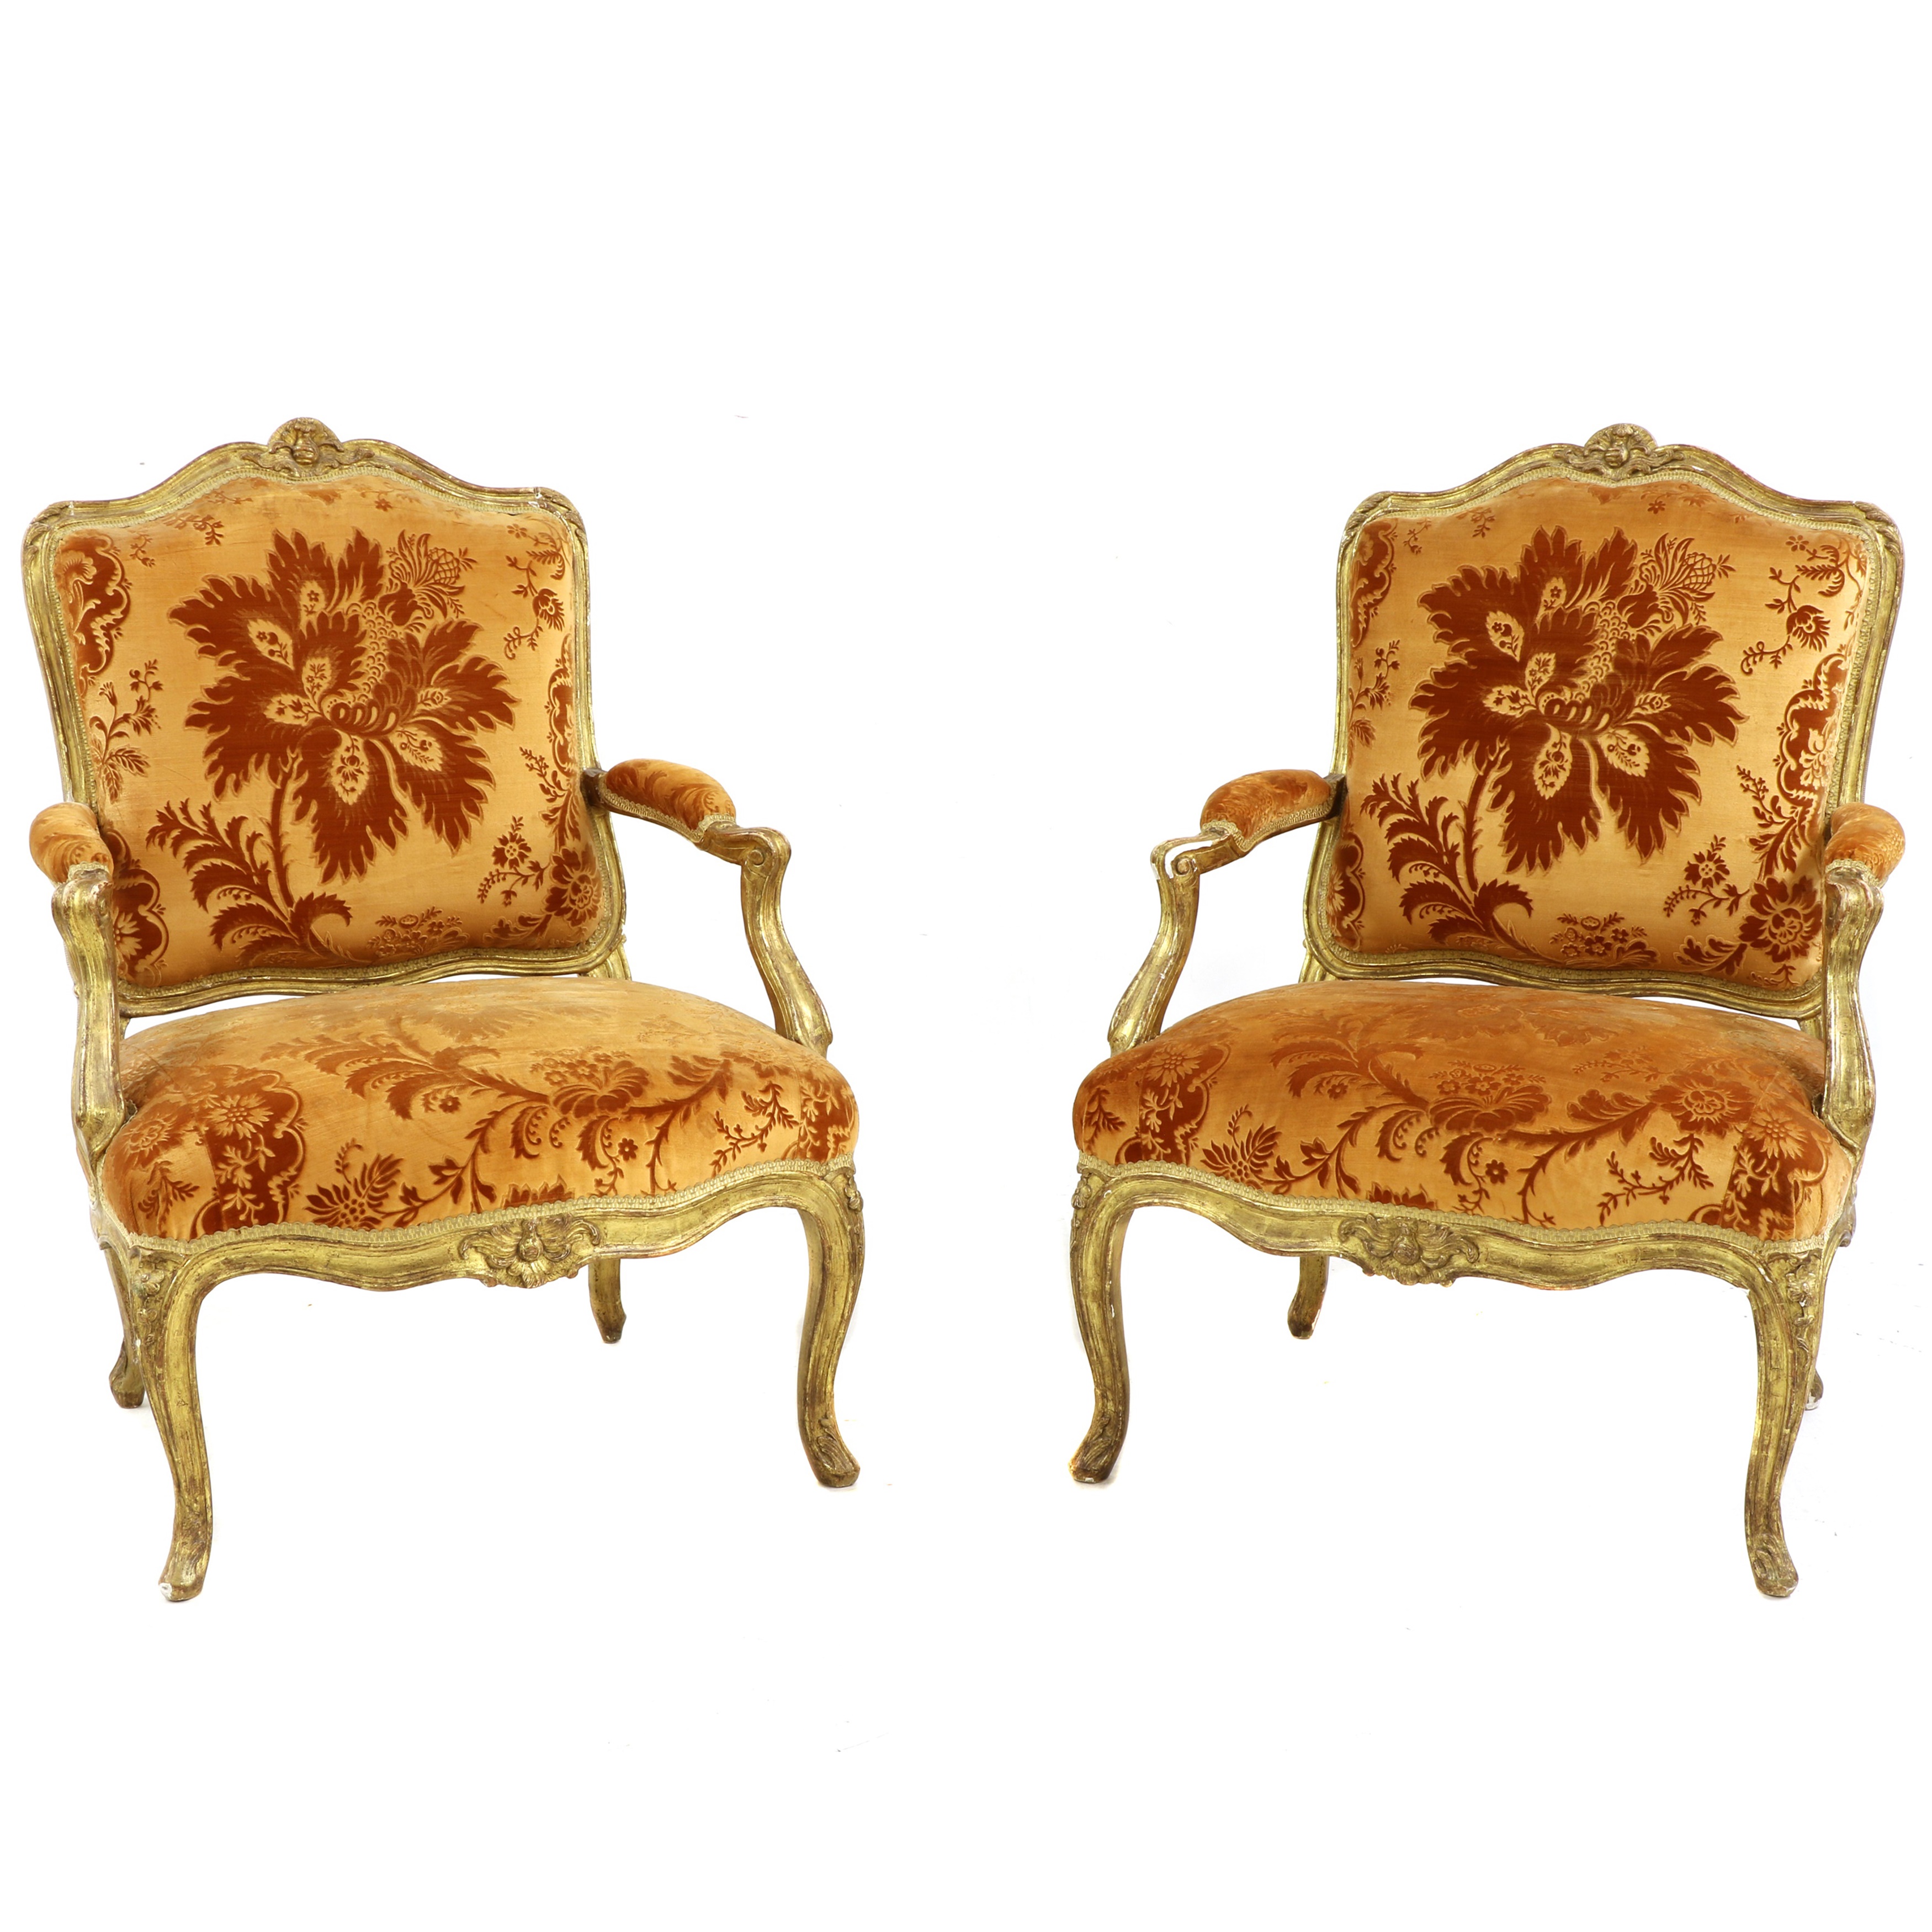 A pair of French Louis XV giltwood fauteuils a la reine attributed to Louis Cresson (1706-1761)